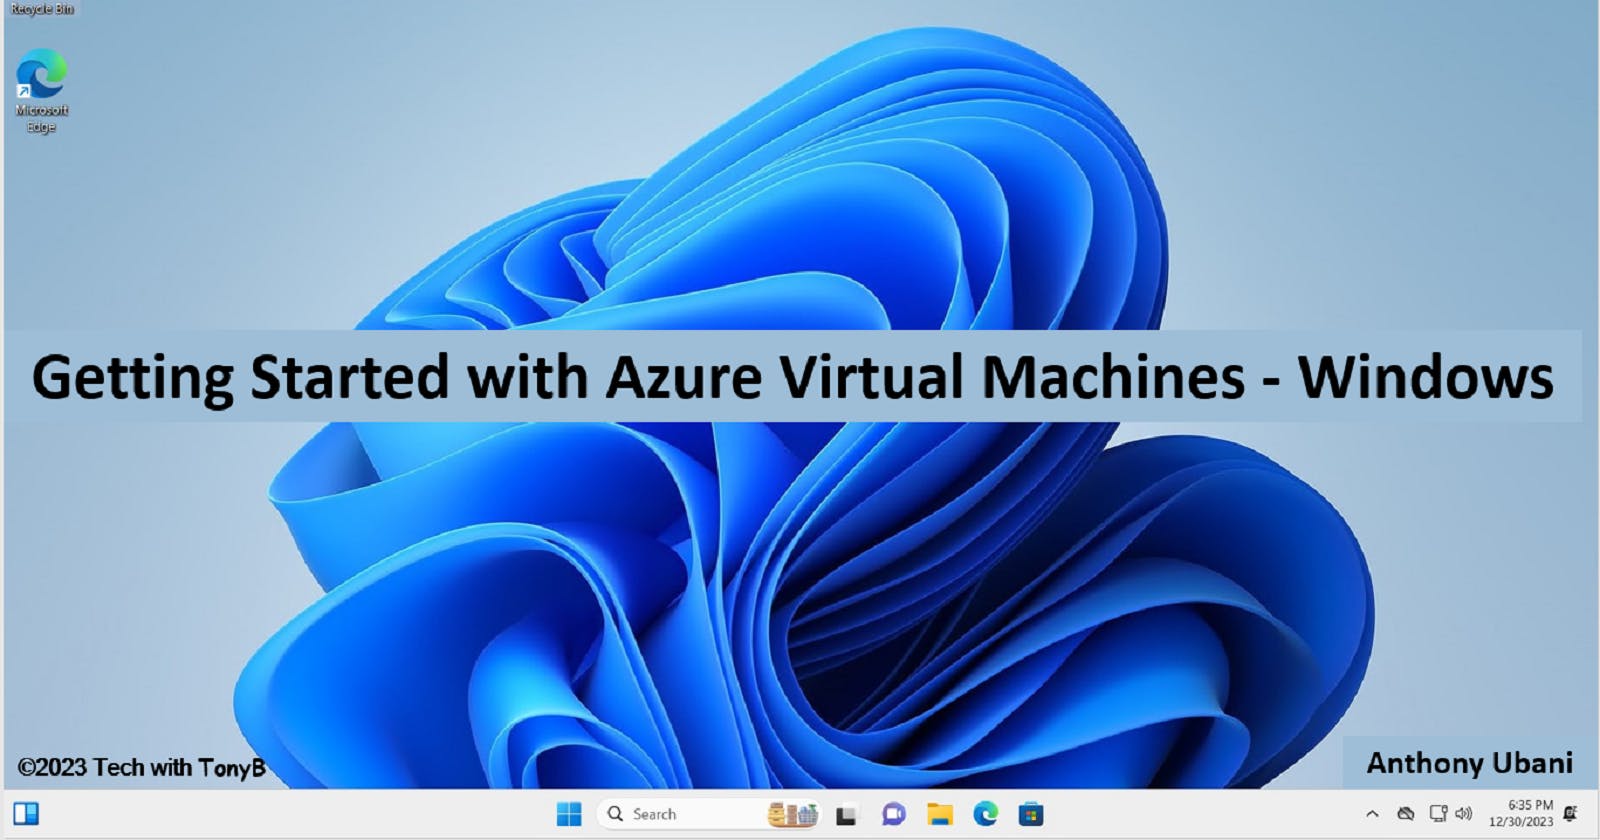 Getting Started with Azure Virtual Machines - Windows